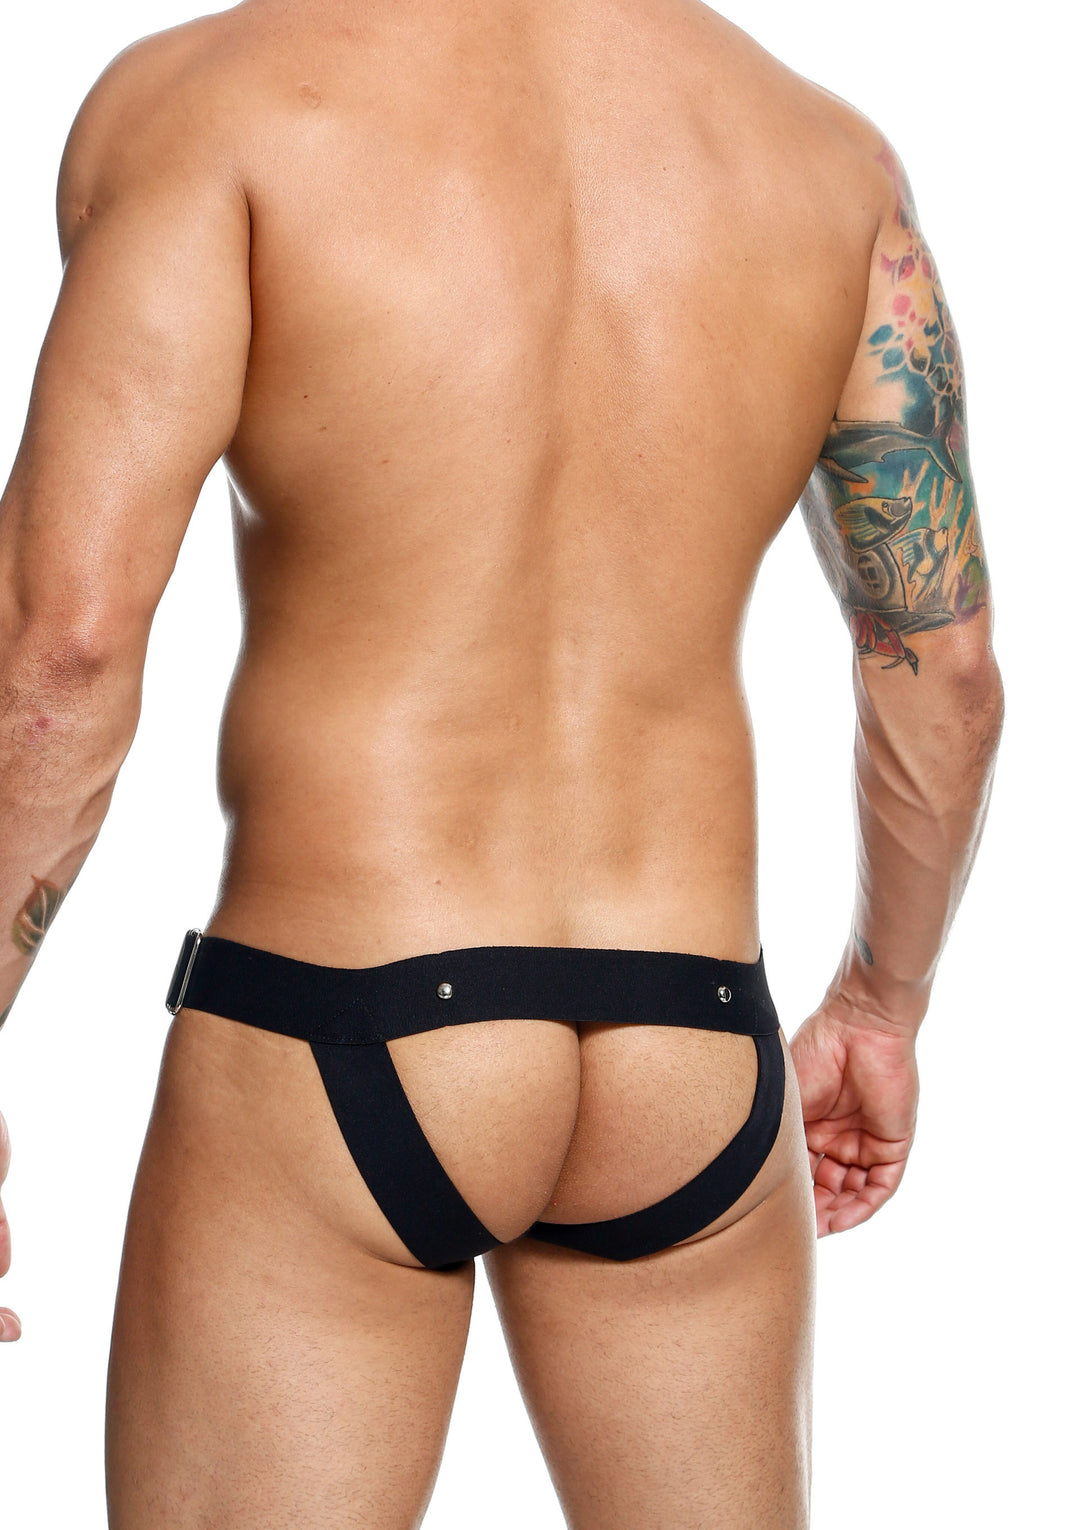 Briefs with black cock ring DNGEON Cockring Jockstrap